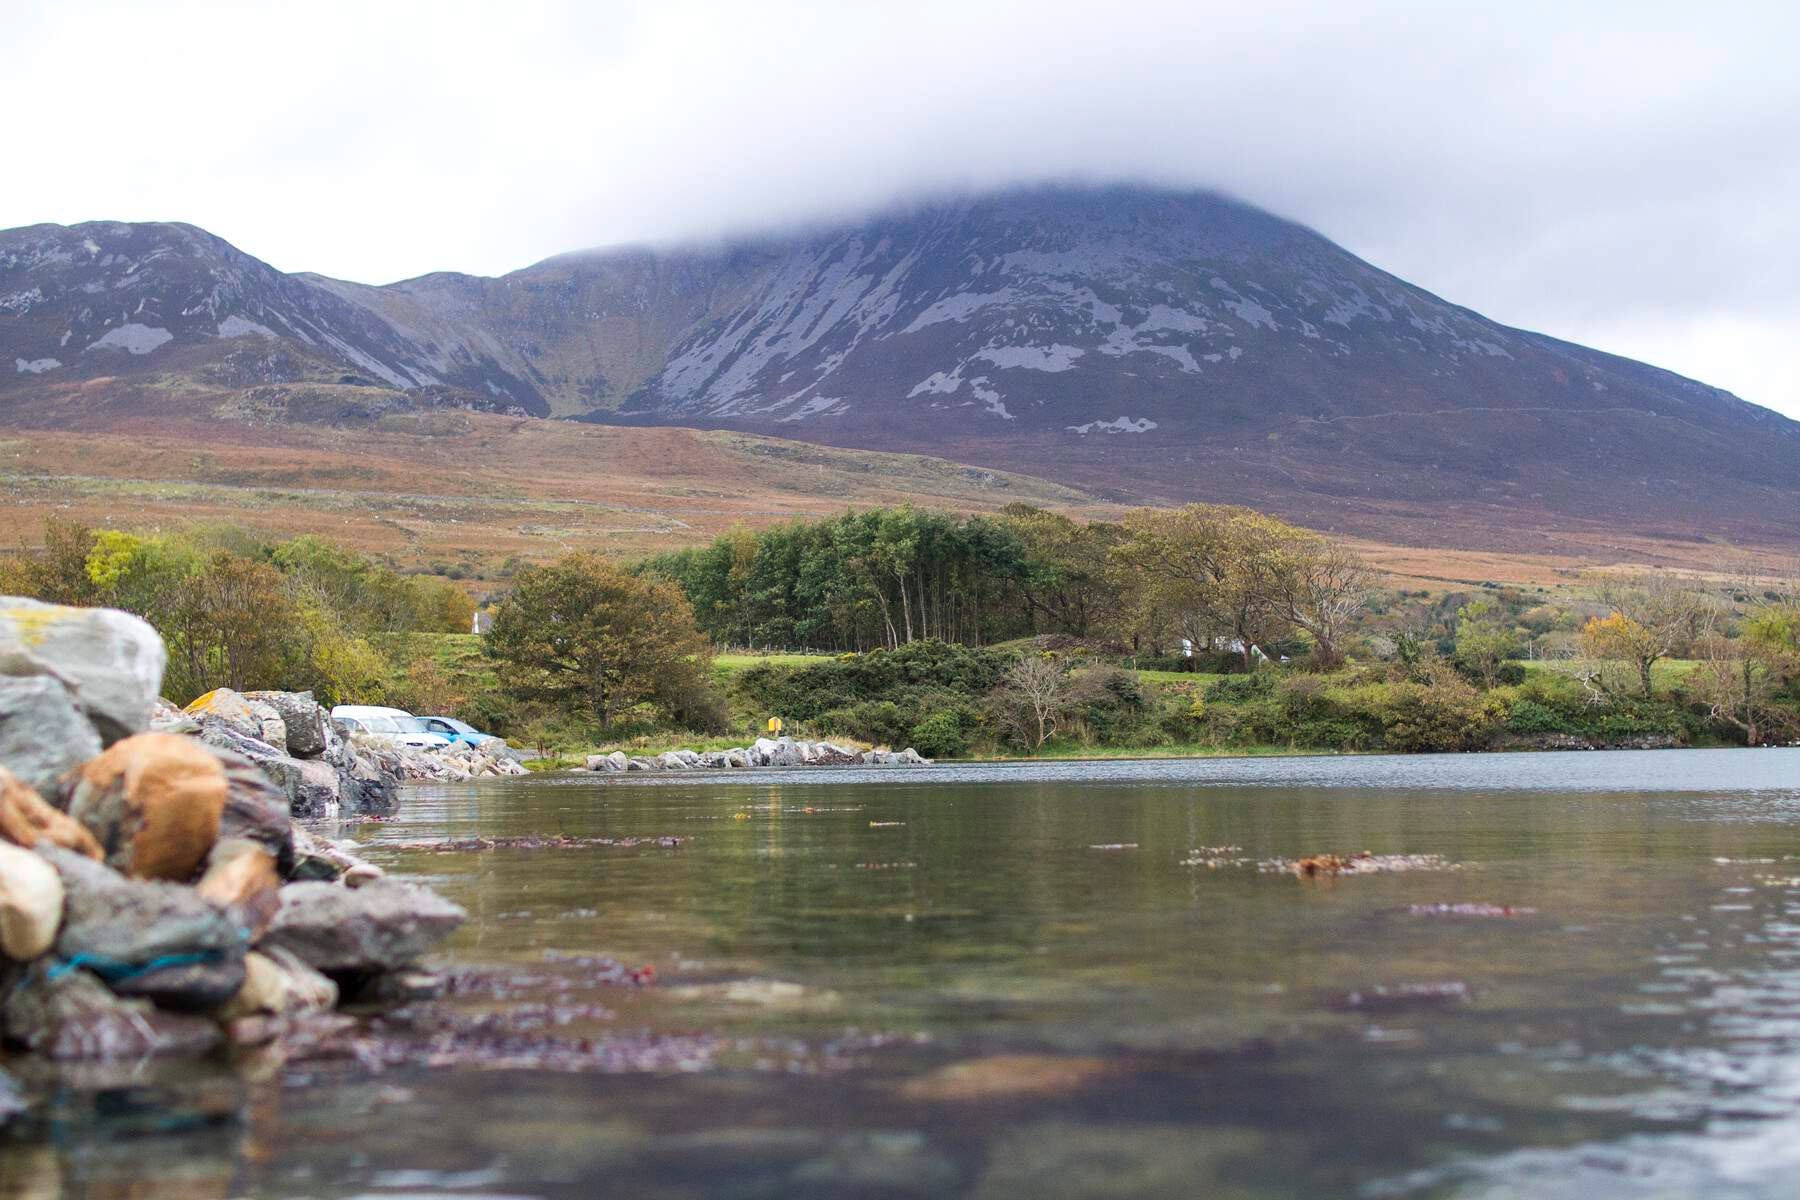 Views of the mountains of Connemara await those who reach the summit